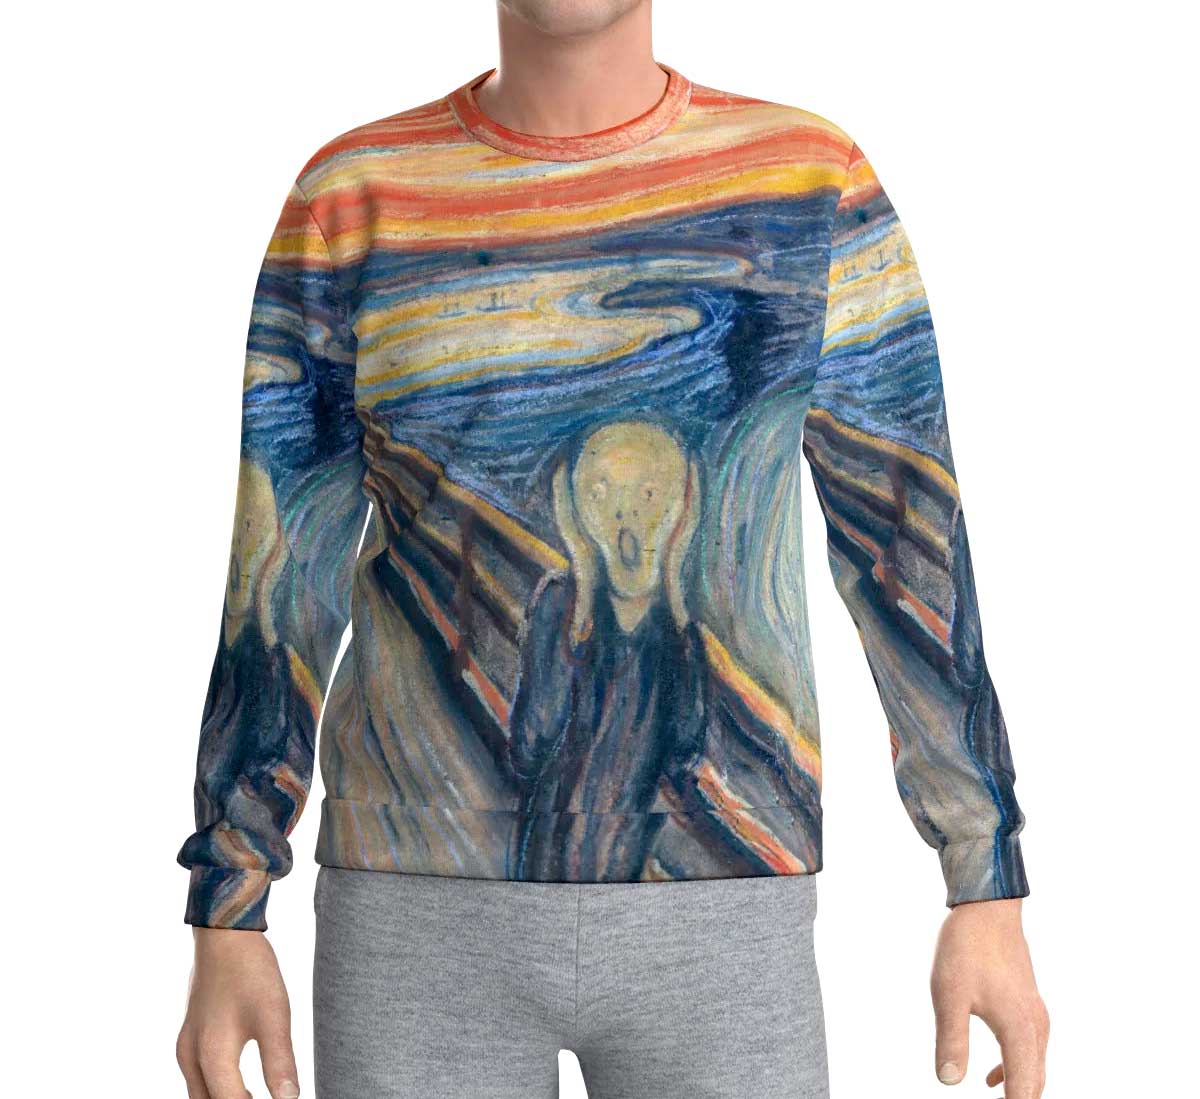 Elevate your fashion with our Timeless Classic Art Sweatshirts